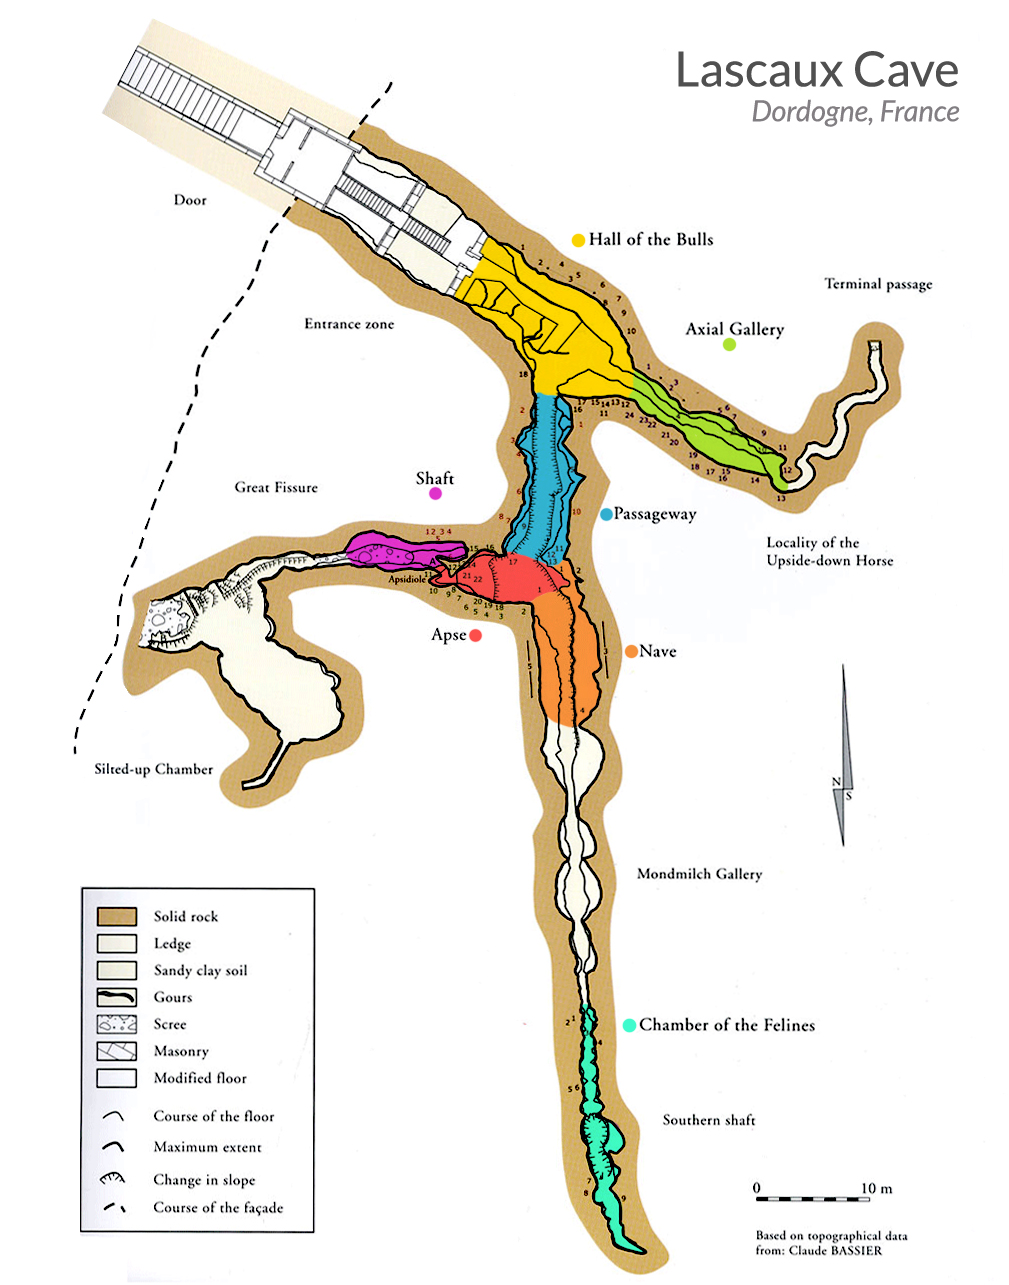 Map of Lascaux Sections, adapted from the map at http://www.american-buddha.com